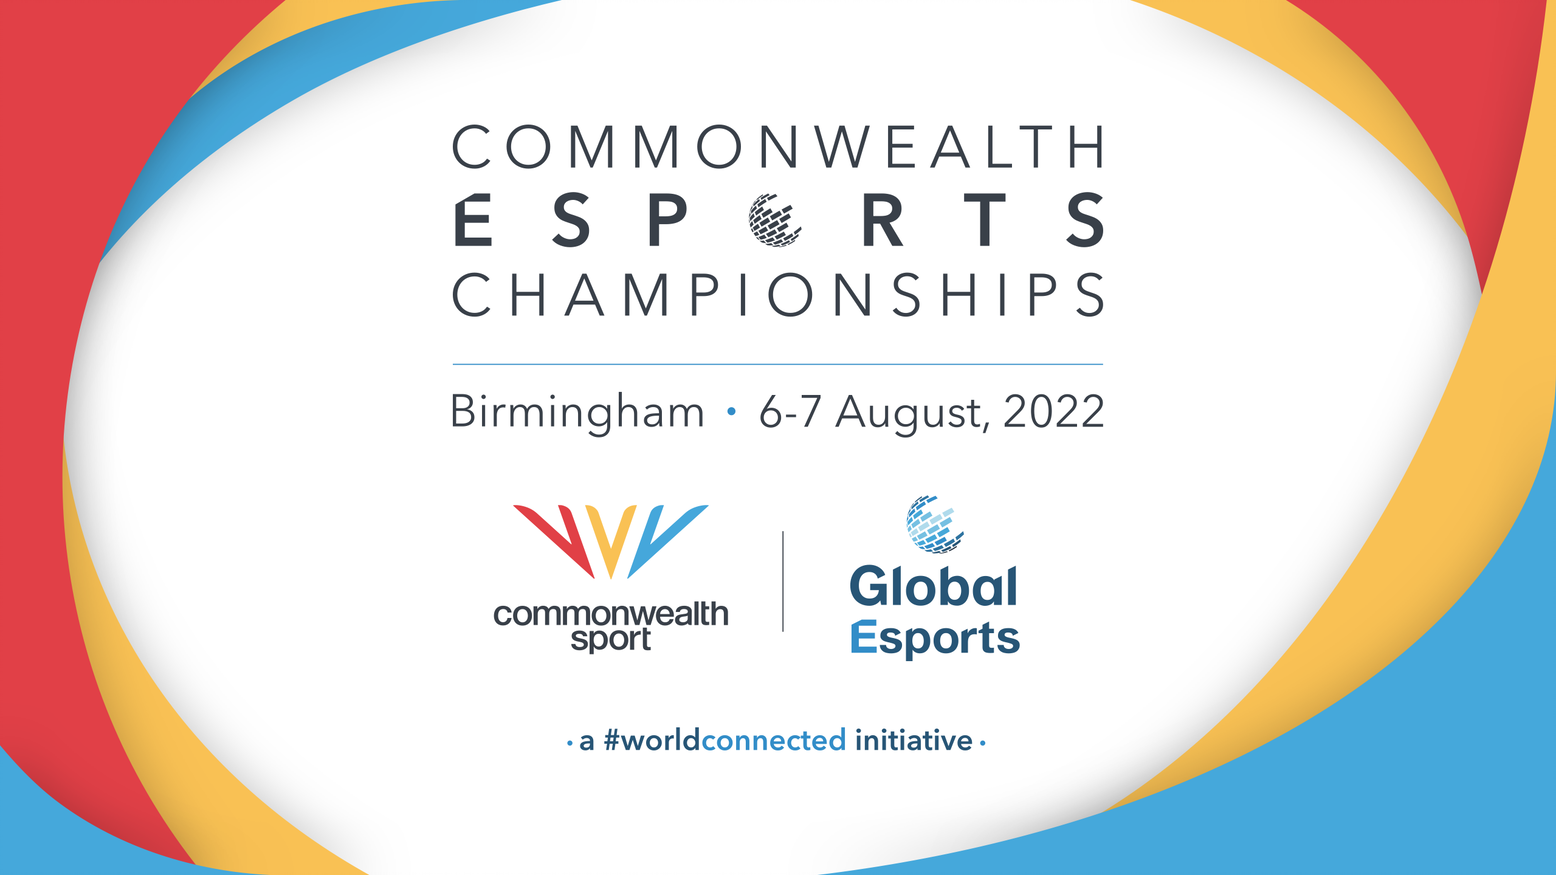 The first Commonwealth Esports Championships is due to be held in Birmingham during the Commonwealth Games ©CGF 